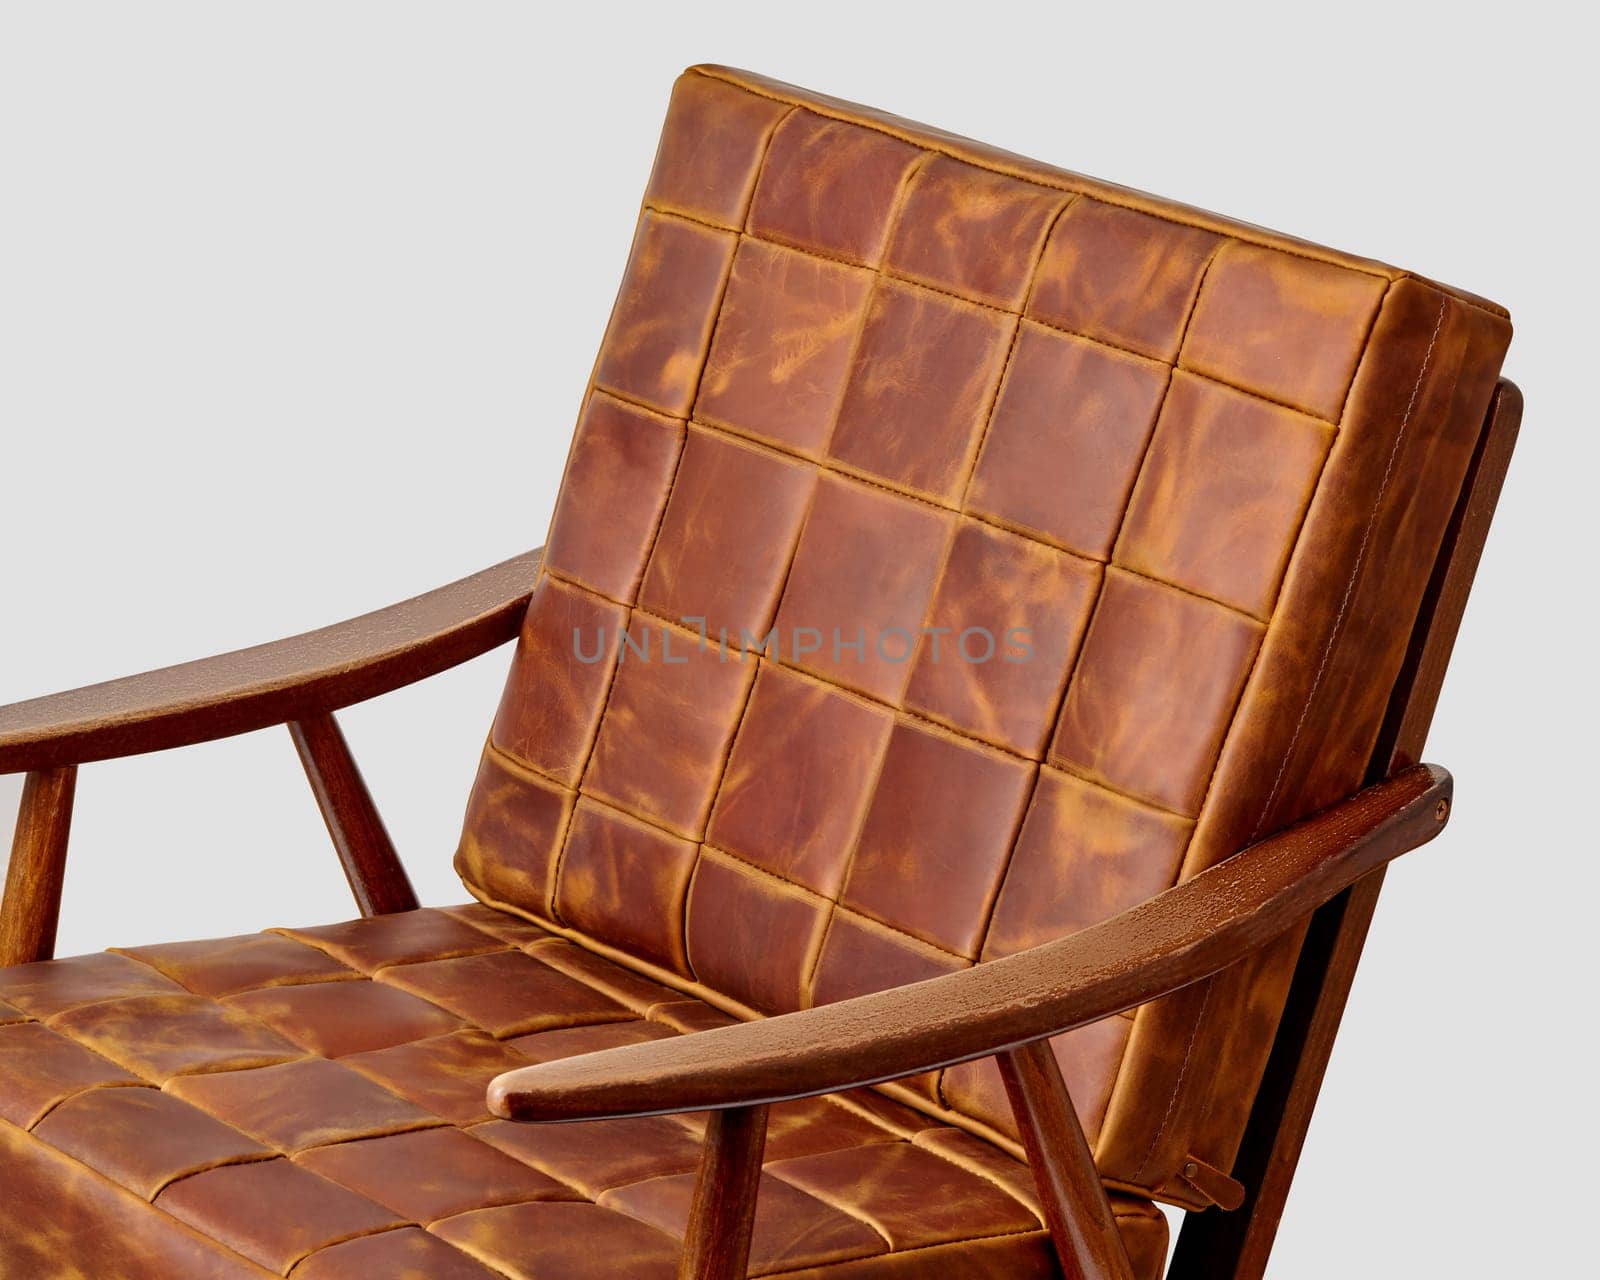 Distinctive armchair featuring patchwork design of smooth brown leather pieces combined with sleek wooden frame, showcasing blend of artisanal charm and modern elegance